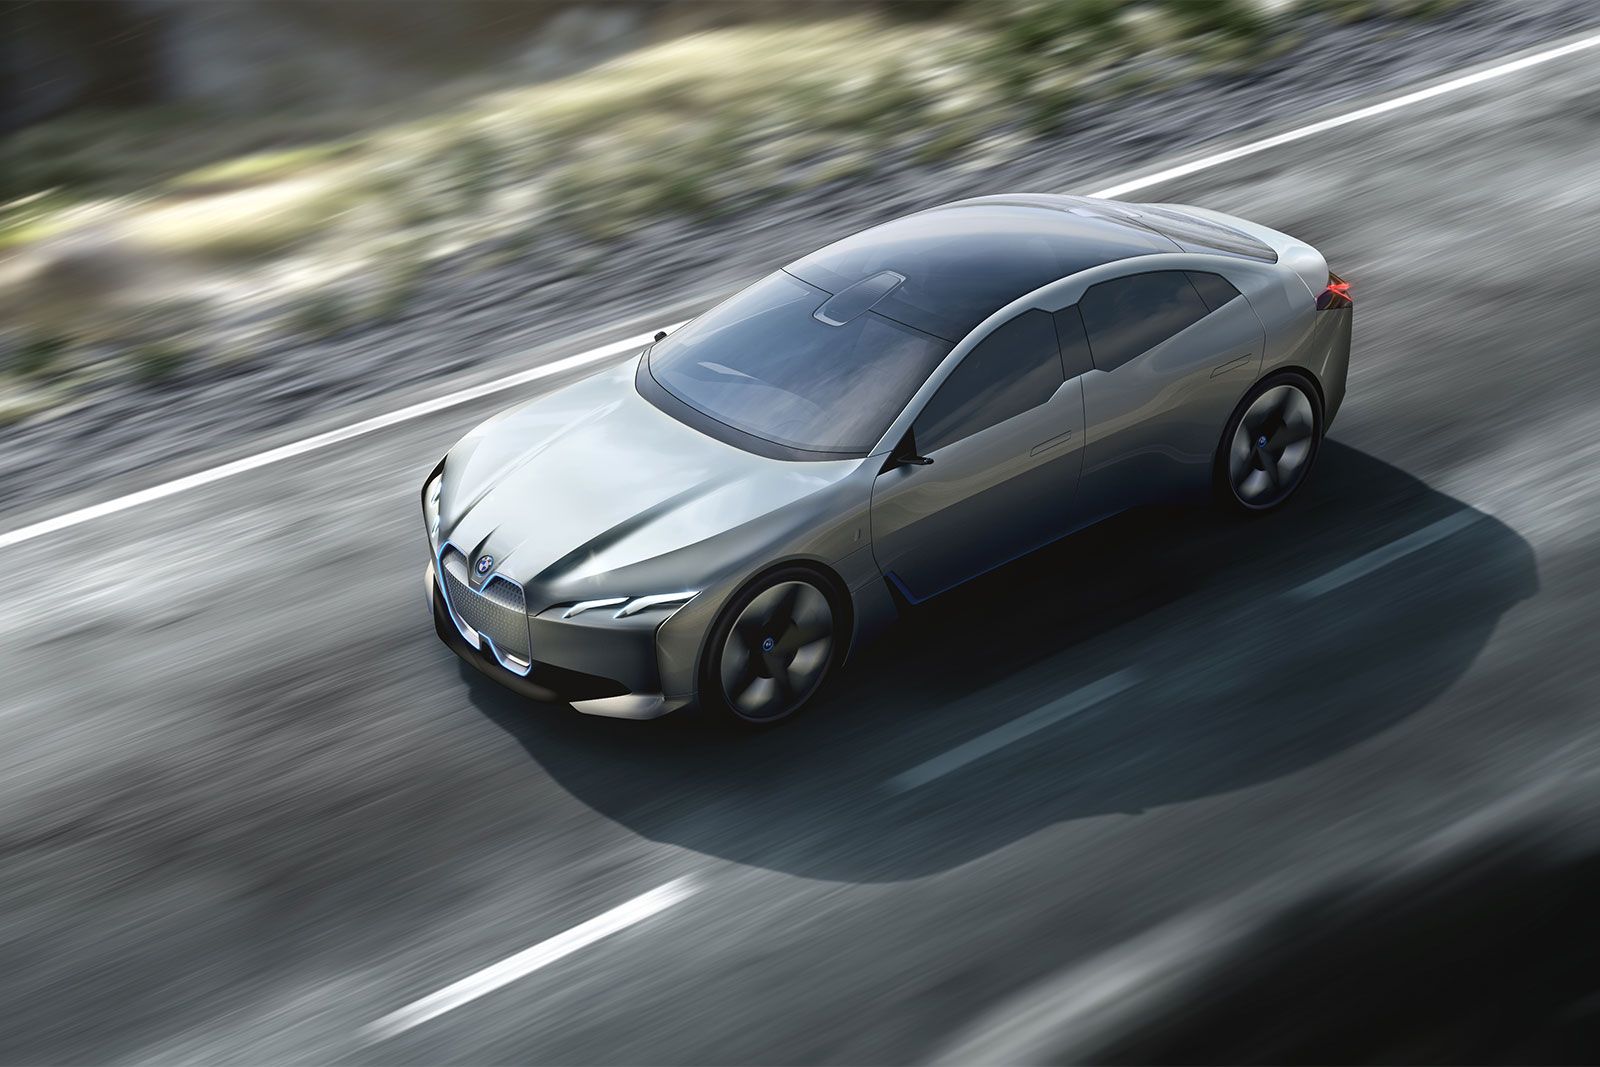 BMW commits to electric car production introduces i Vision Dynamic concept coupe image 1